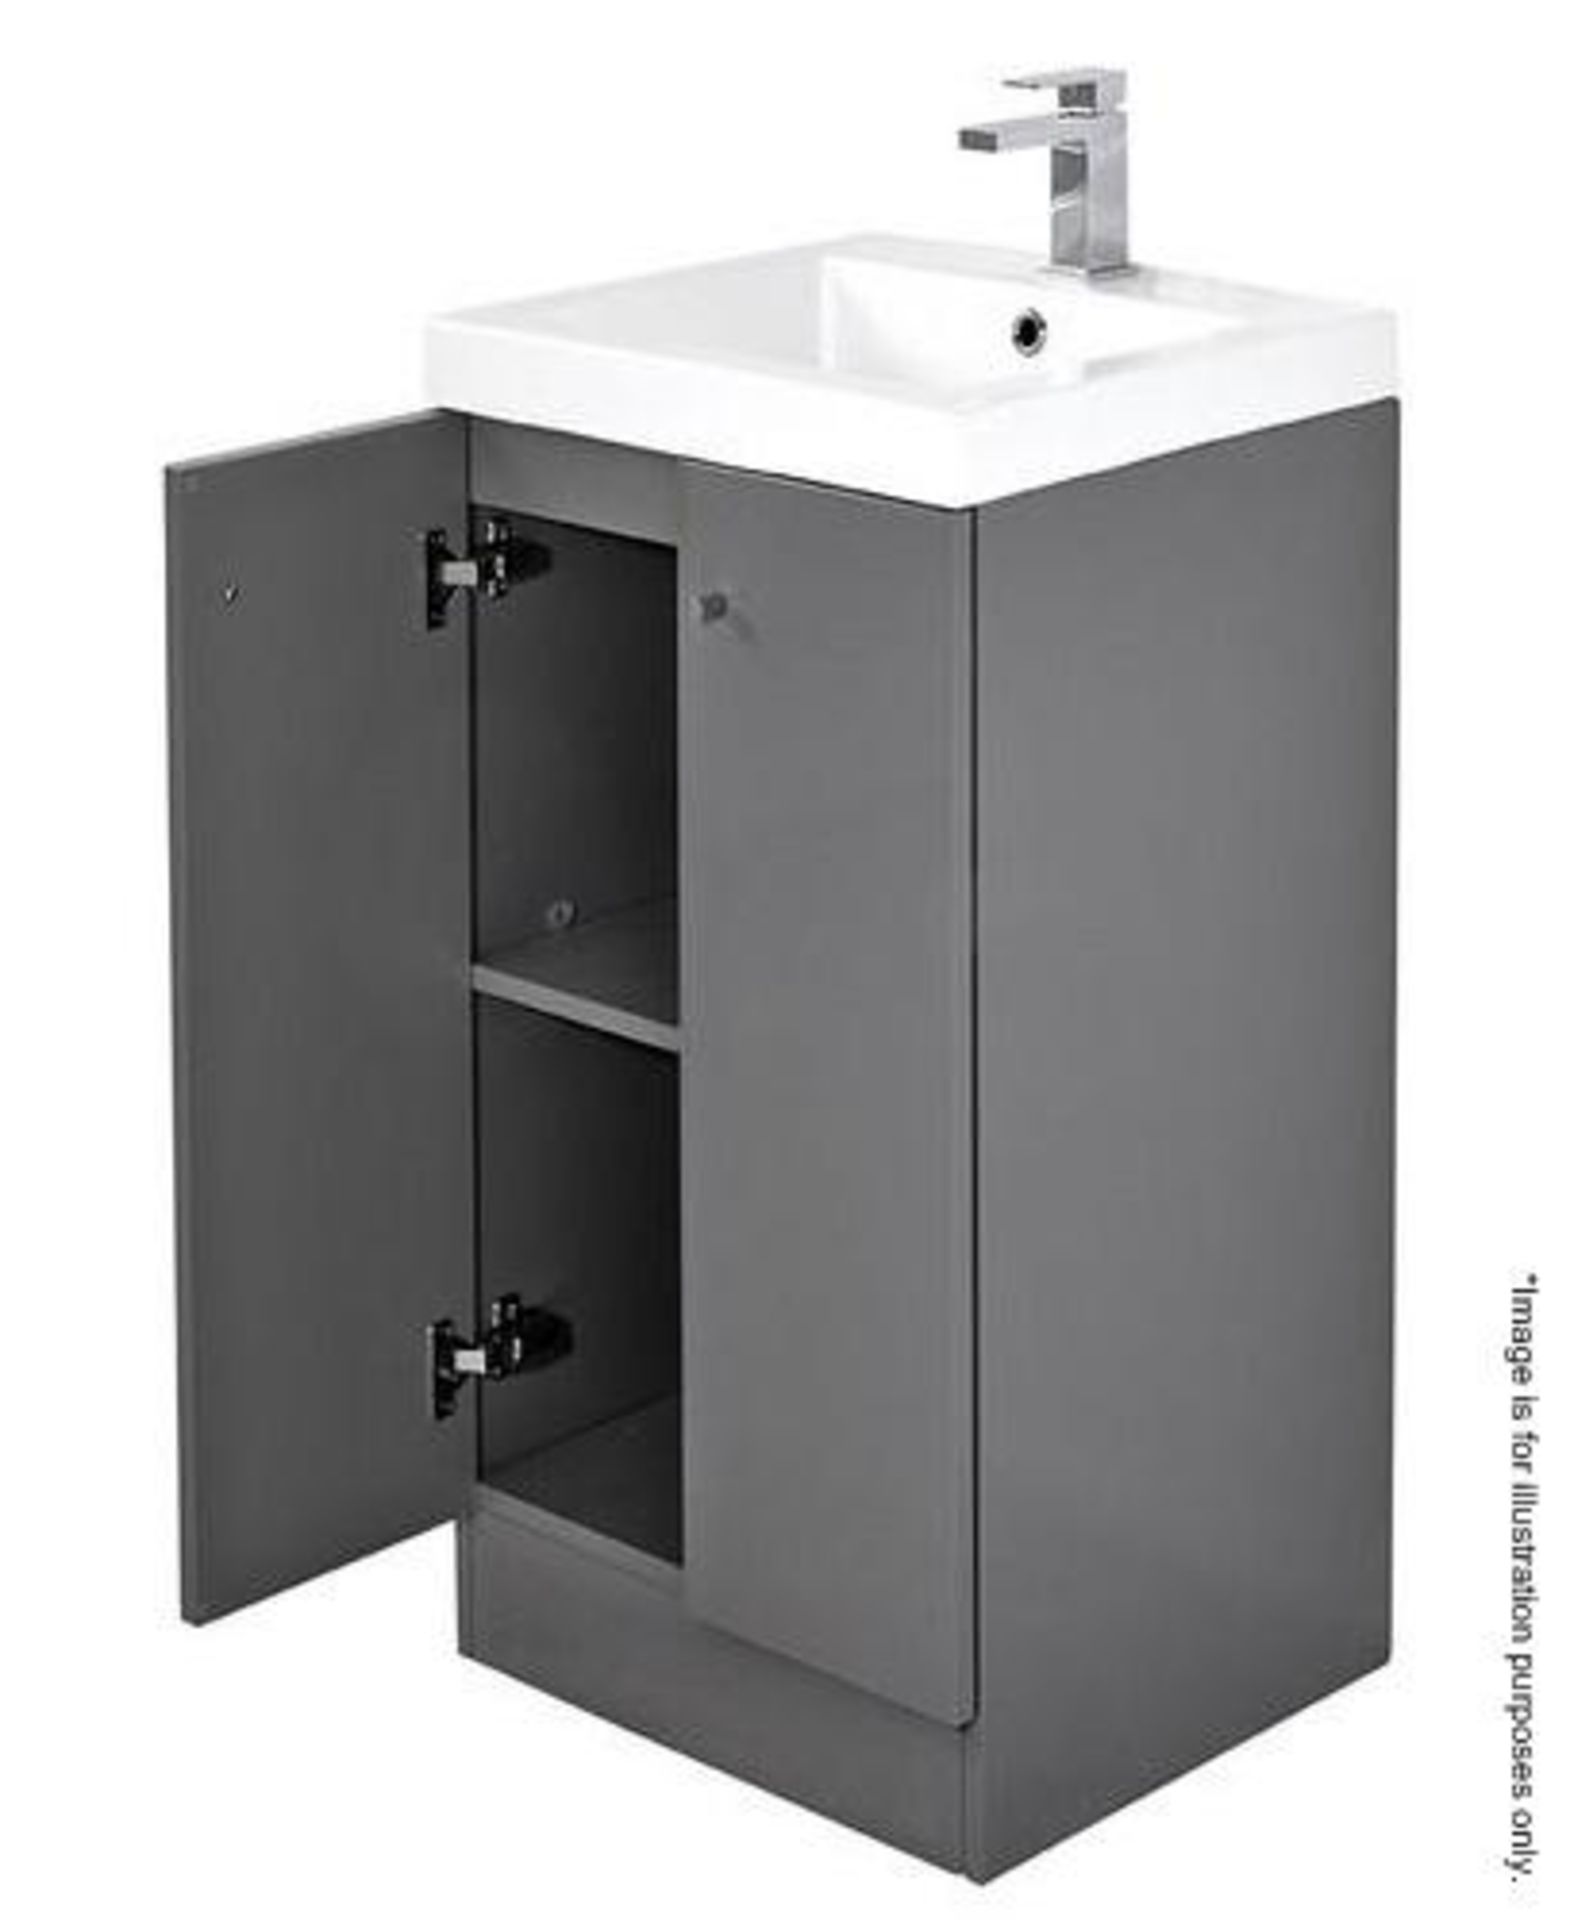 9 x Alpine Duo 400 Floorstanding Vanity Units In Gloss Grey - Brand New Boxed Stock - Dimensions: H8 - Image 2 of 3